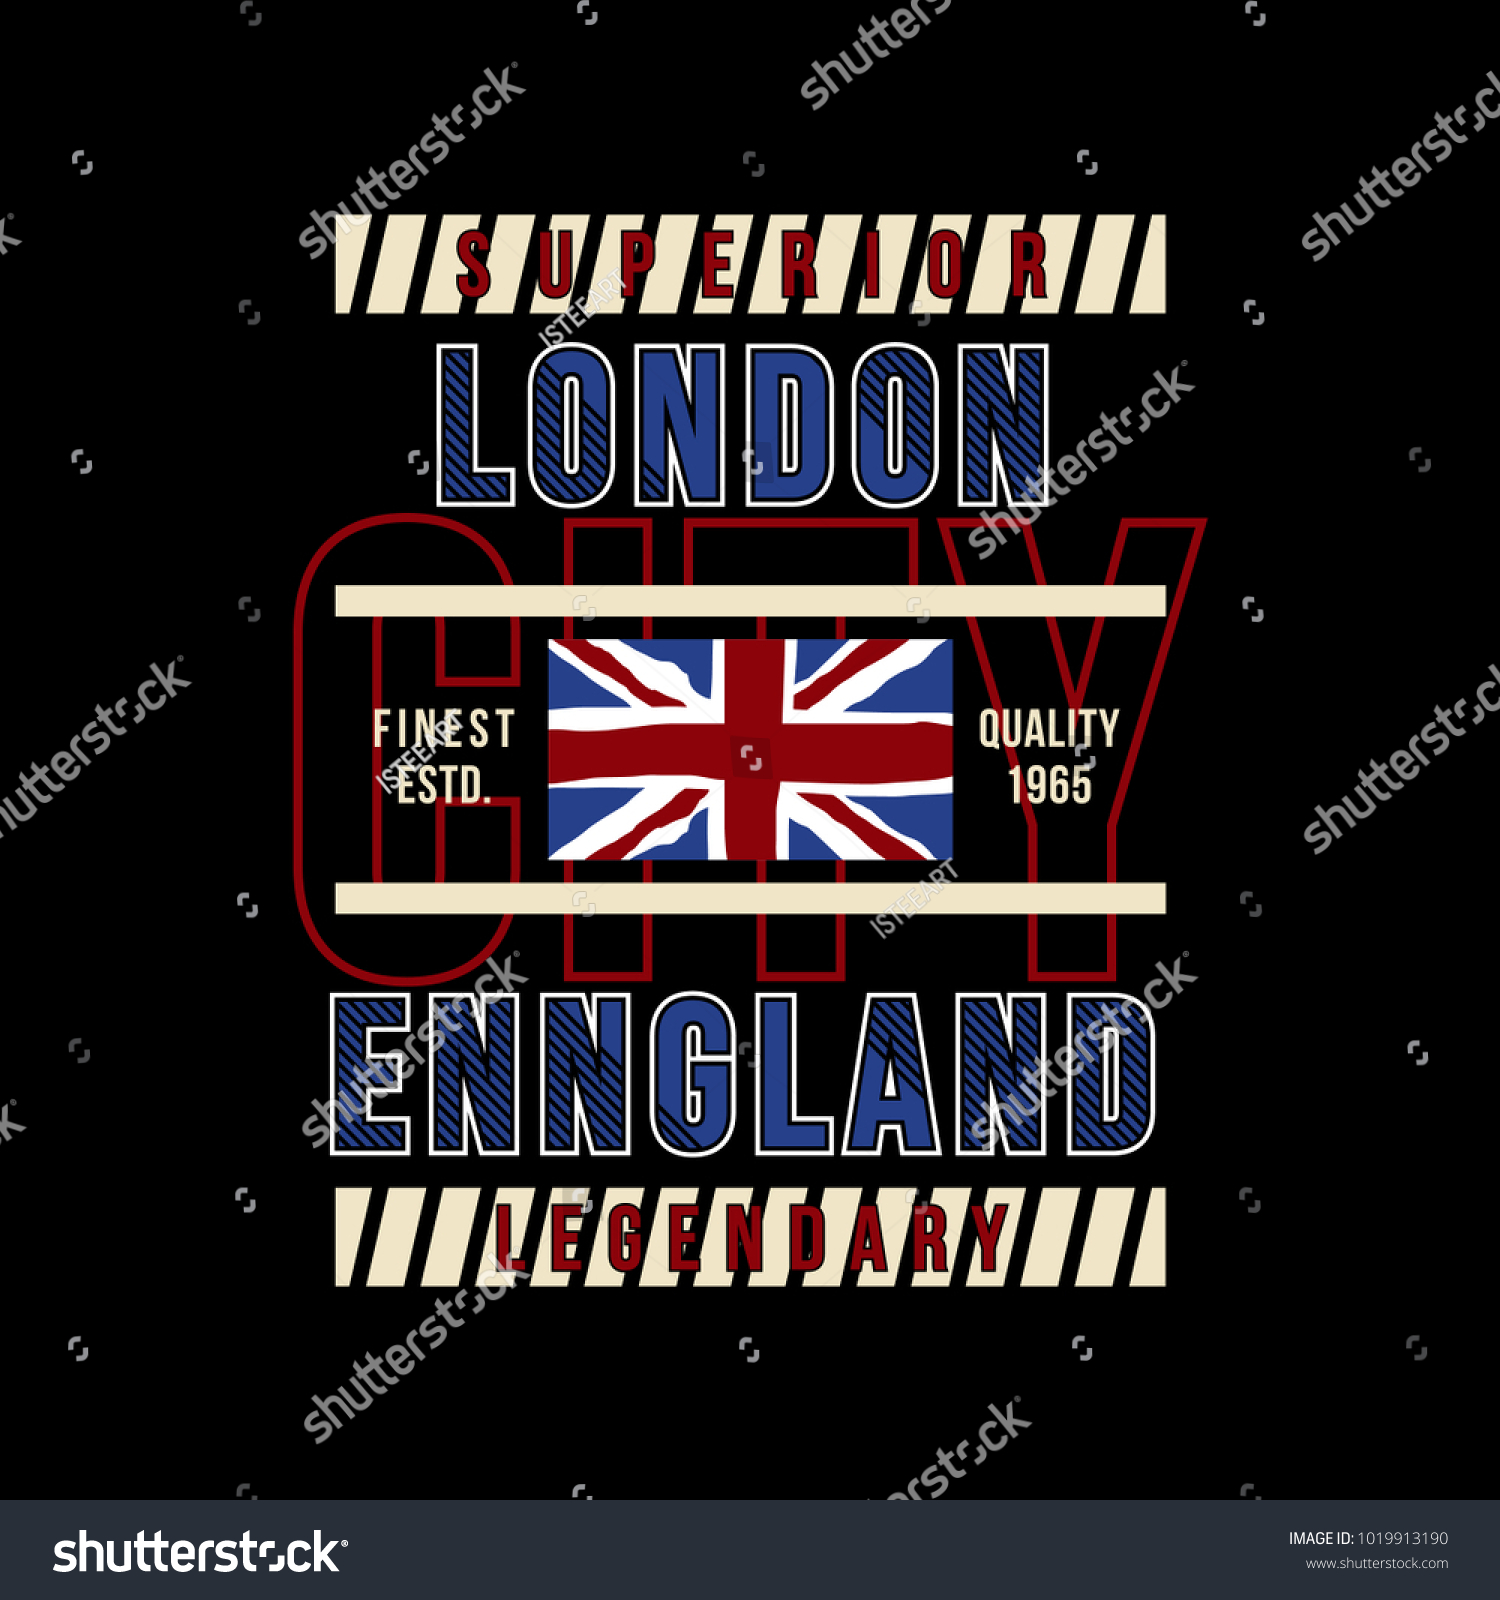 London City T Shirt Design Graphic Stock Vector (Royalty Free ...